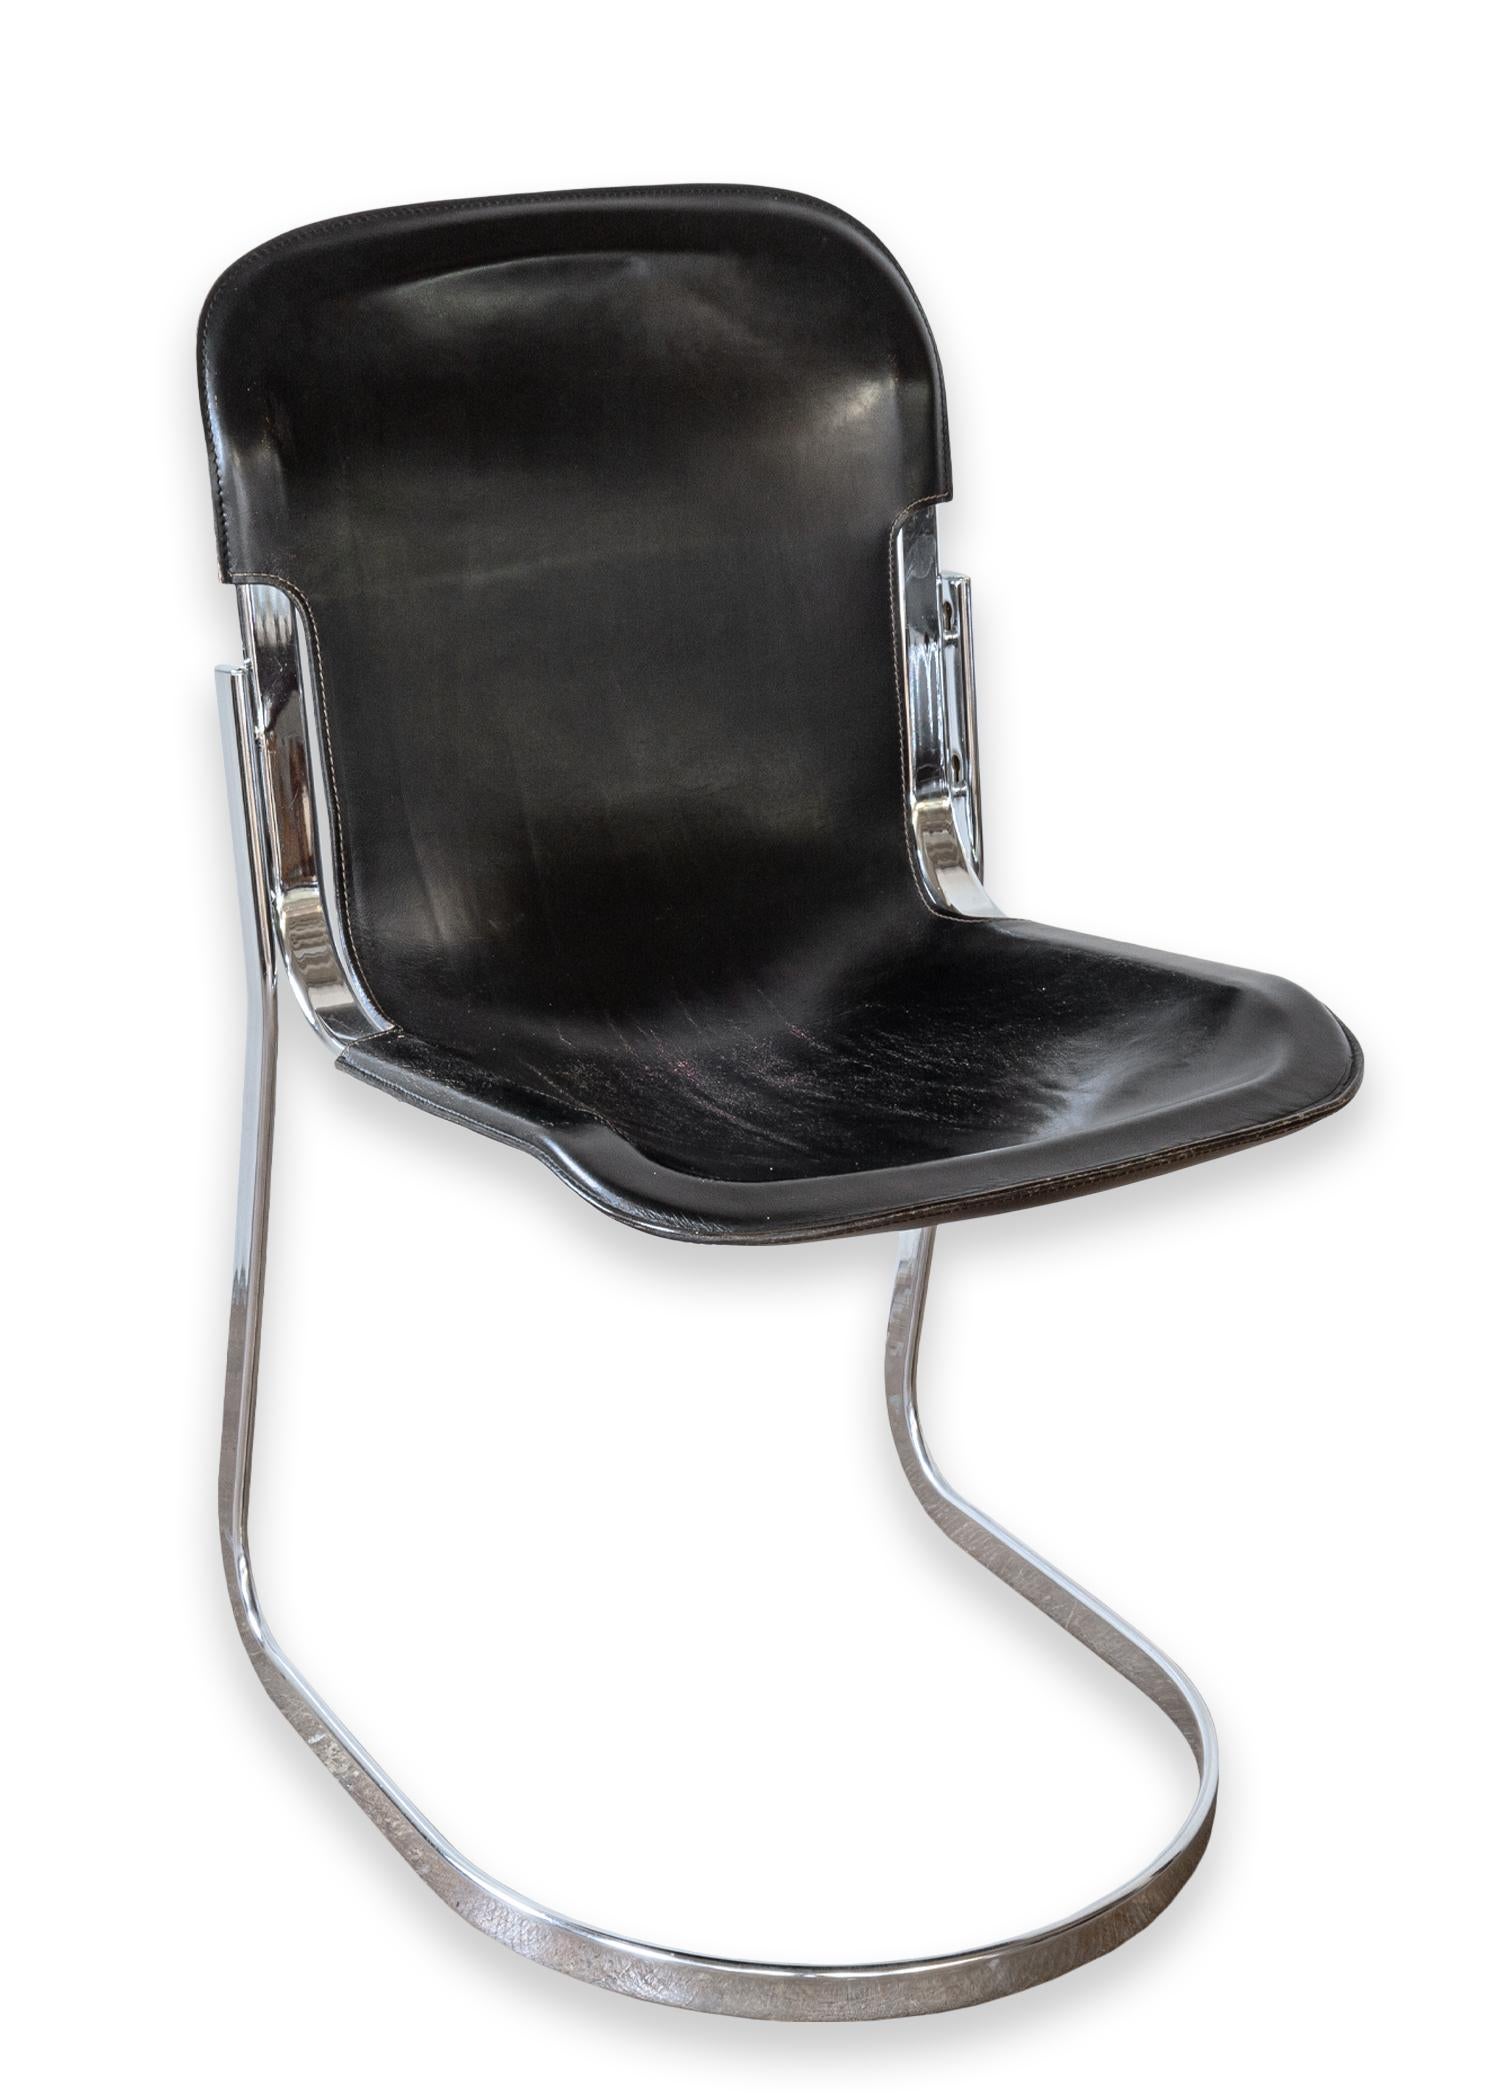 Mid-Century Modern Set of 4 Black Leather Chrome Cantilever Chairs by Willy Rizzo for Cidue Italy